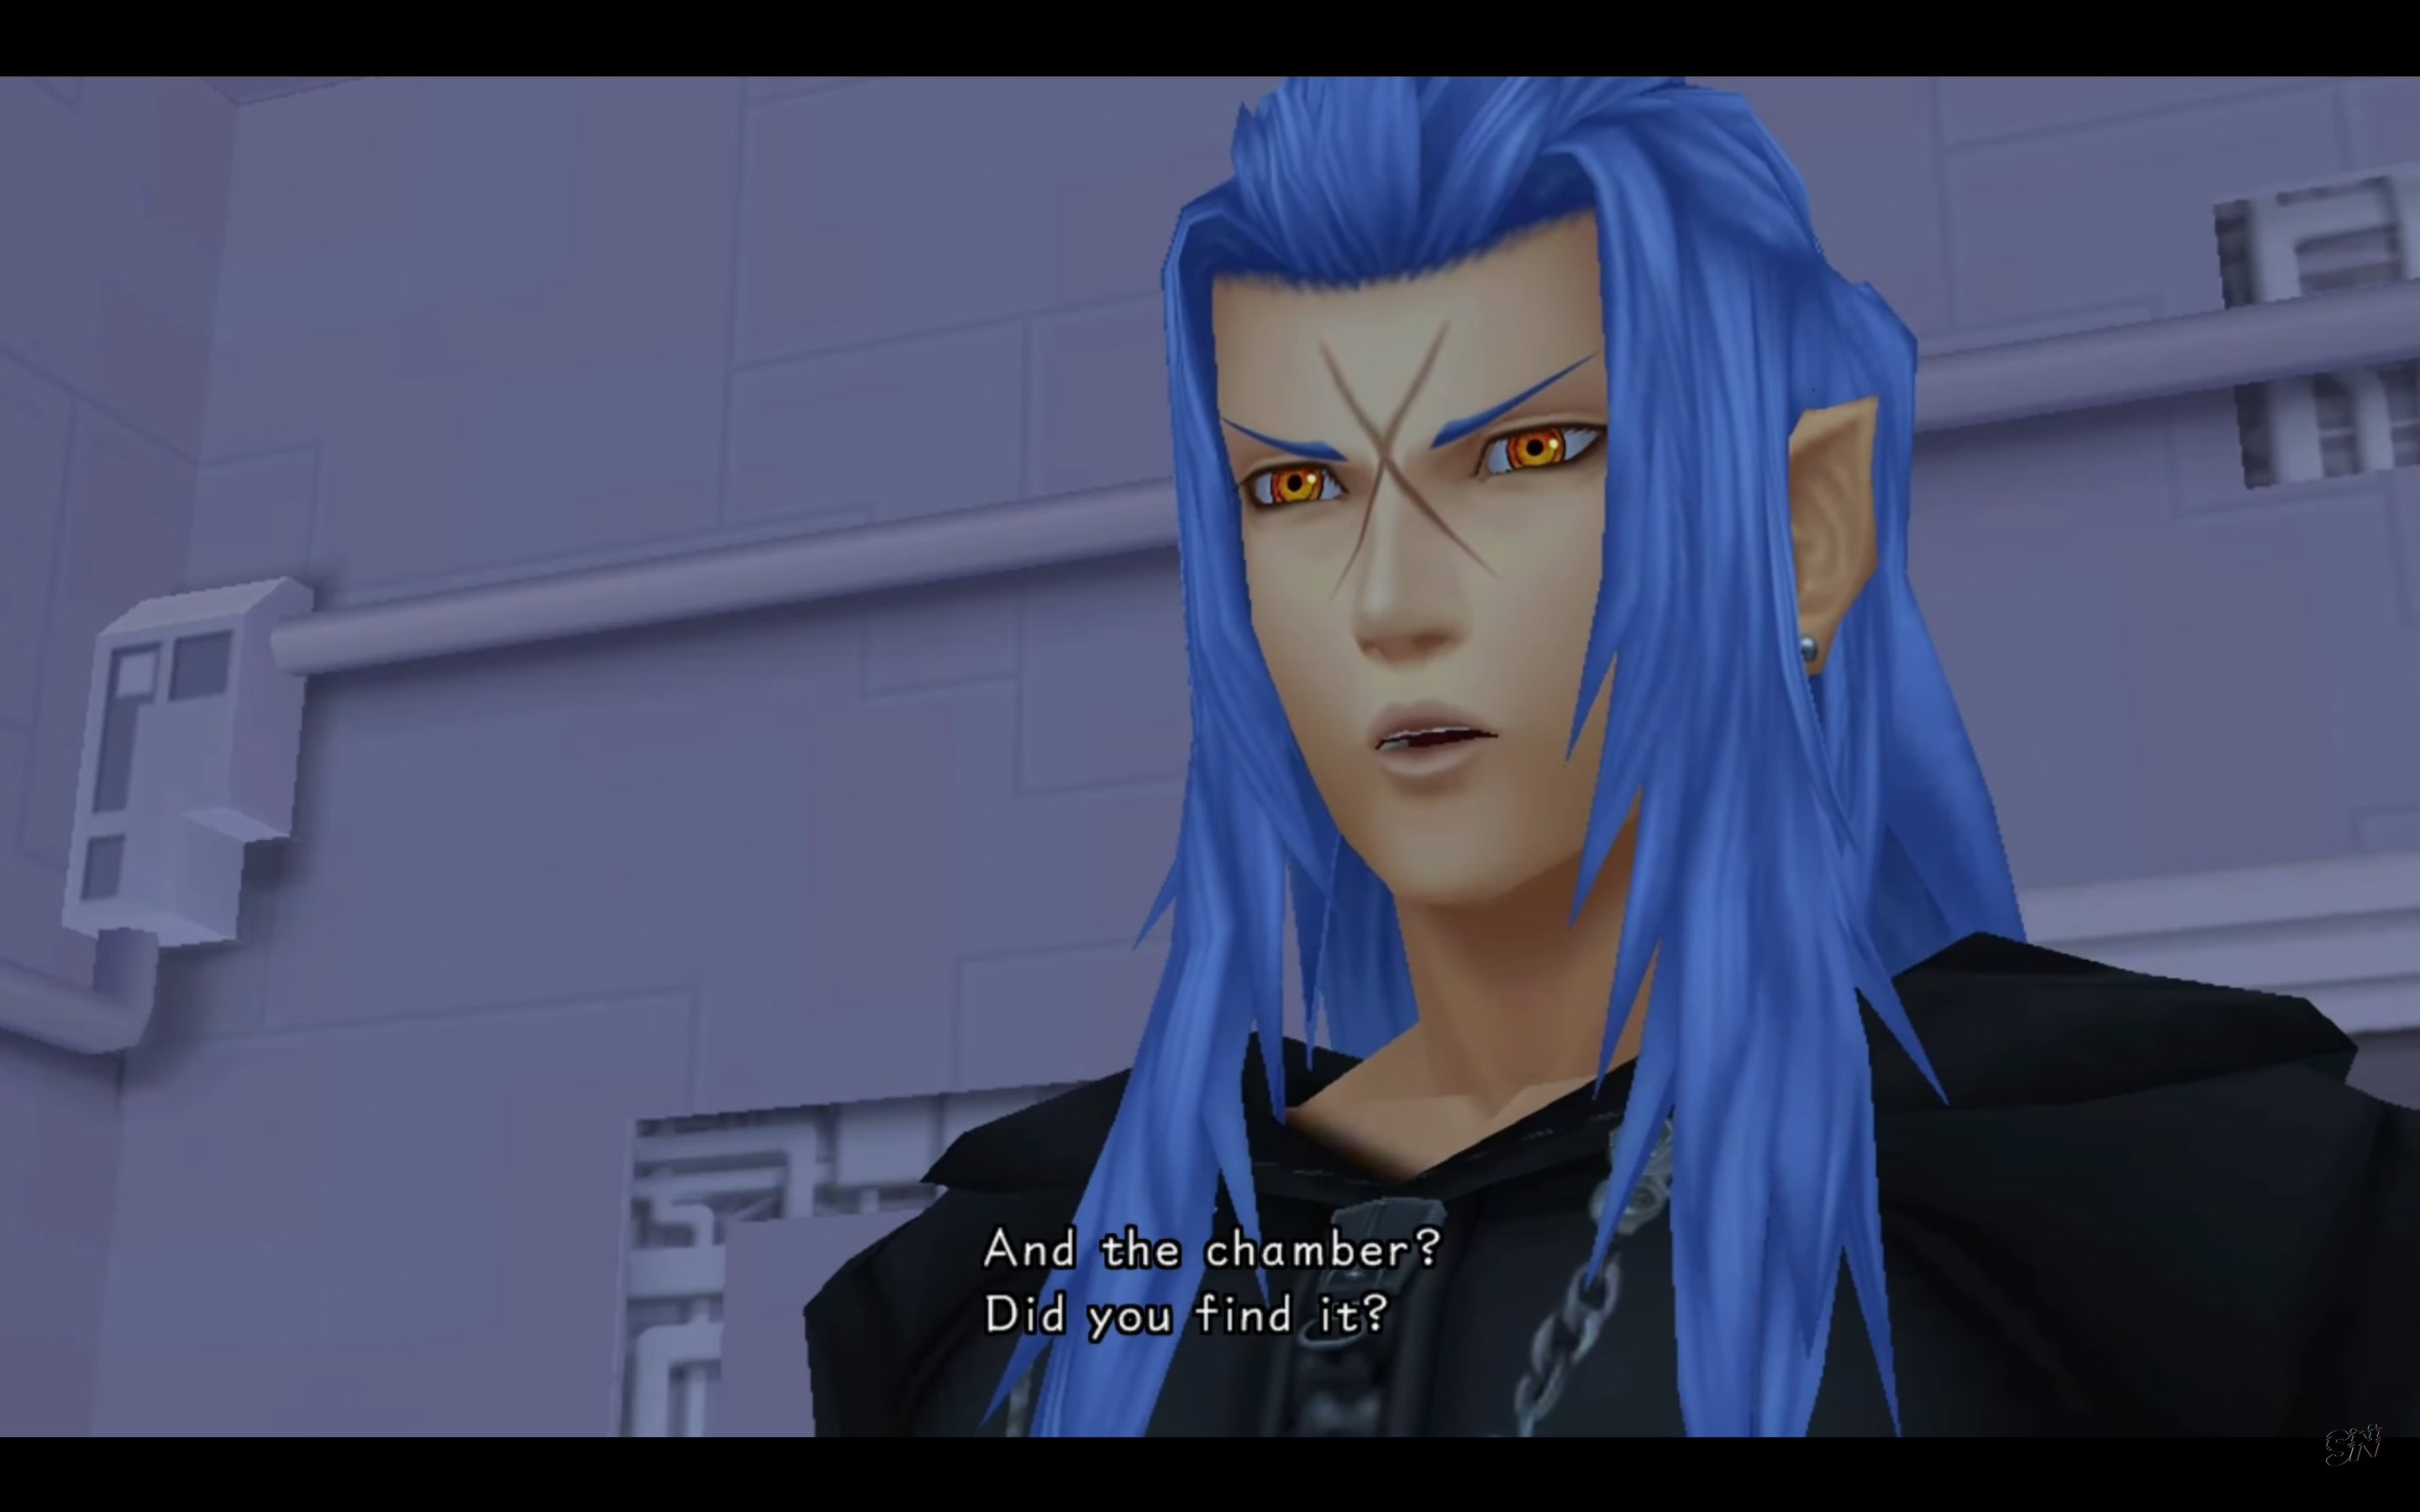 "Kingdom Hearts: 358/2 Days". 2009. Square Enix.
Saix asking about the Chamber of Waking.